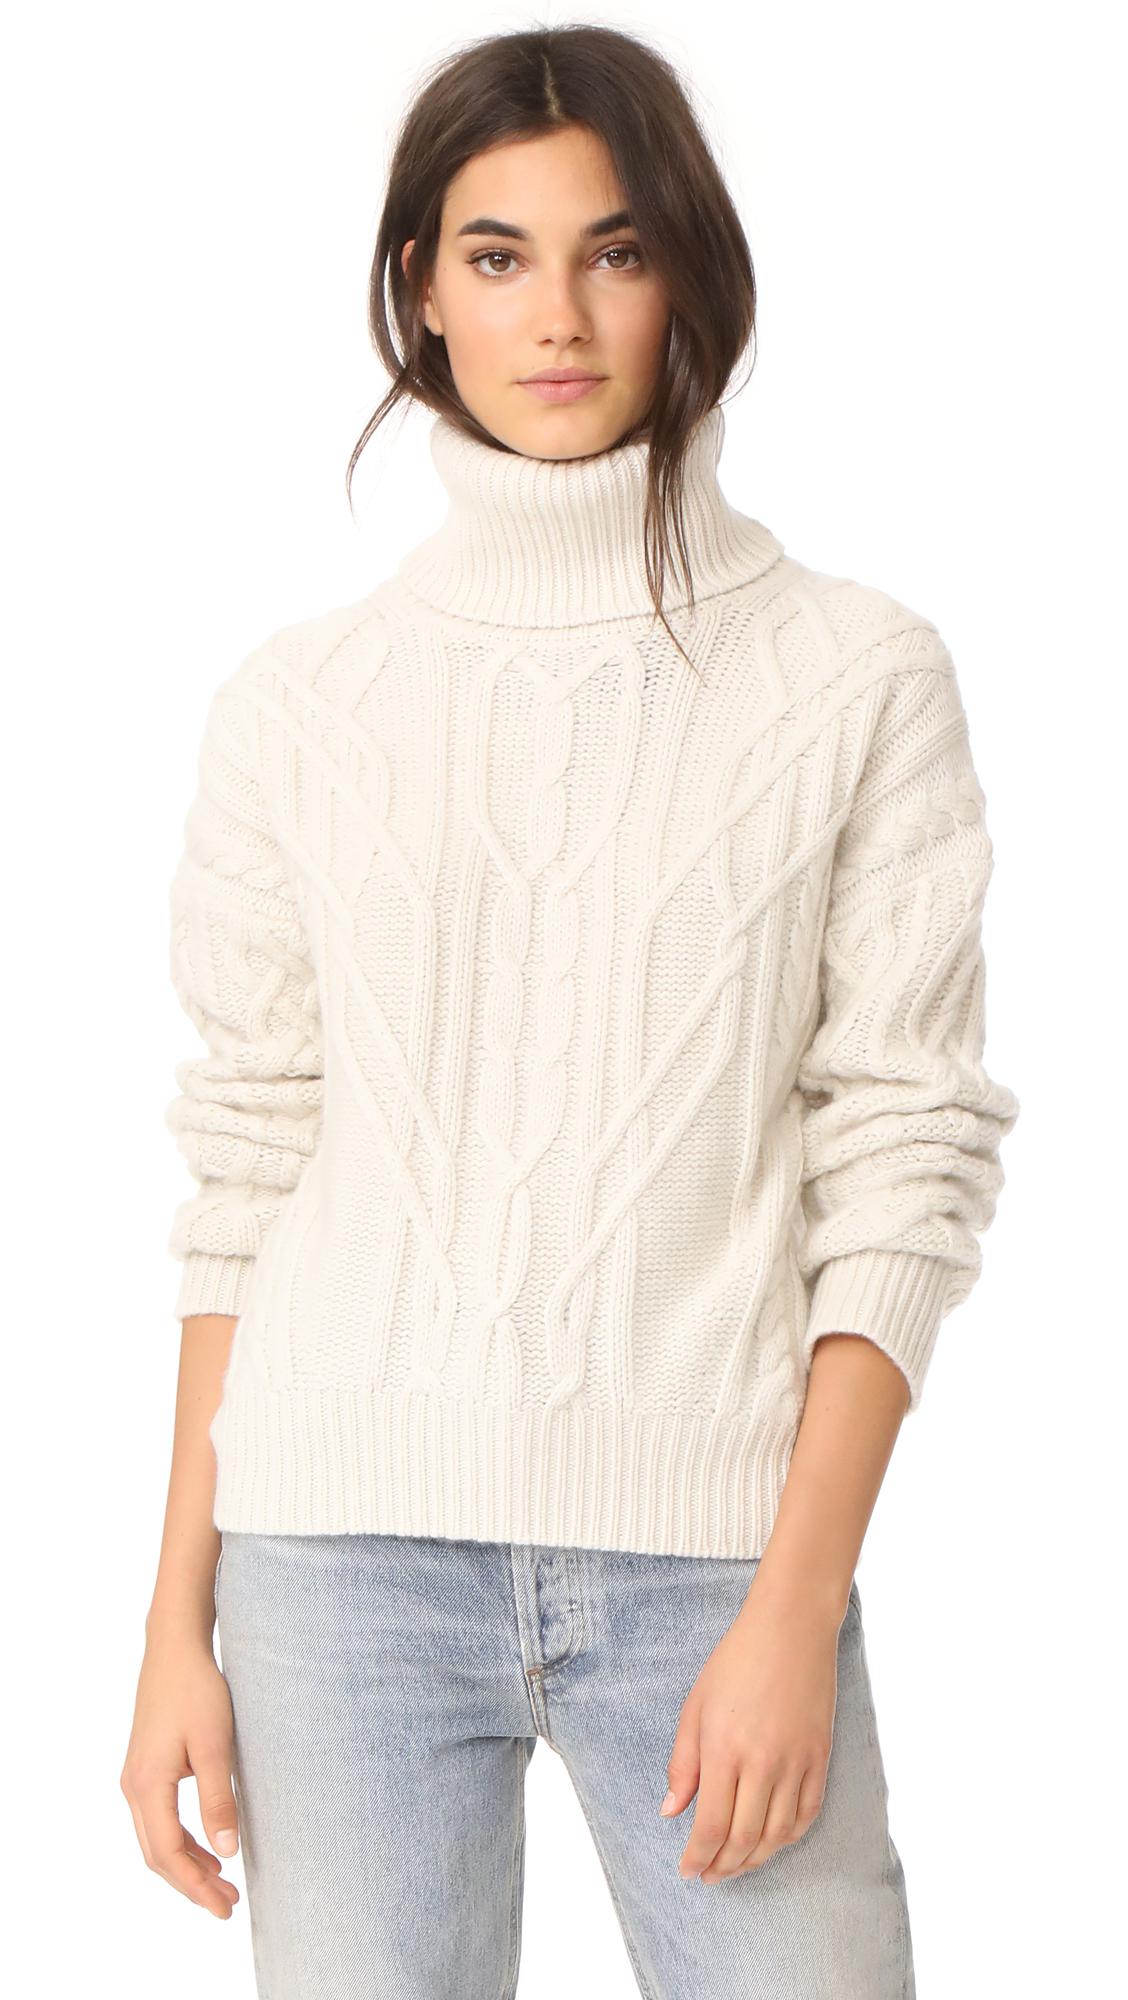 Nili Lotan Cecil Cashmere Sweater in Ivory (White) - Lyst